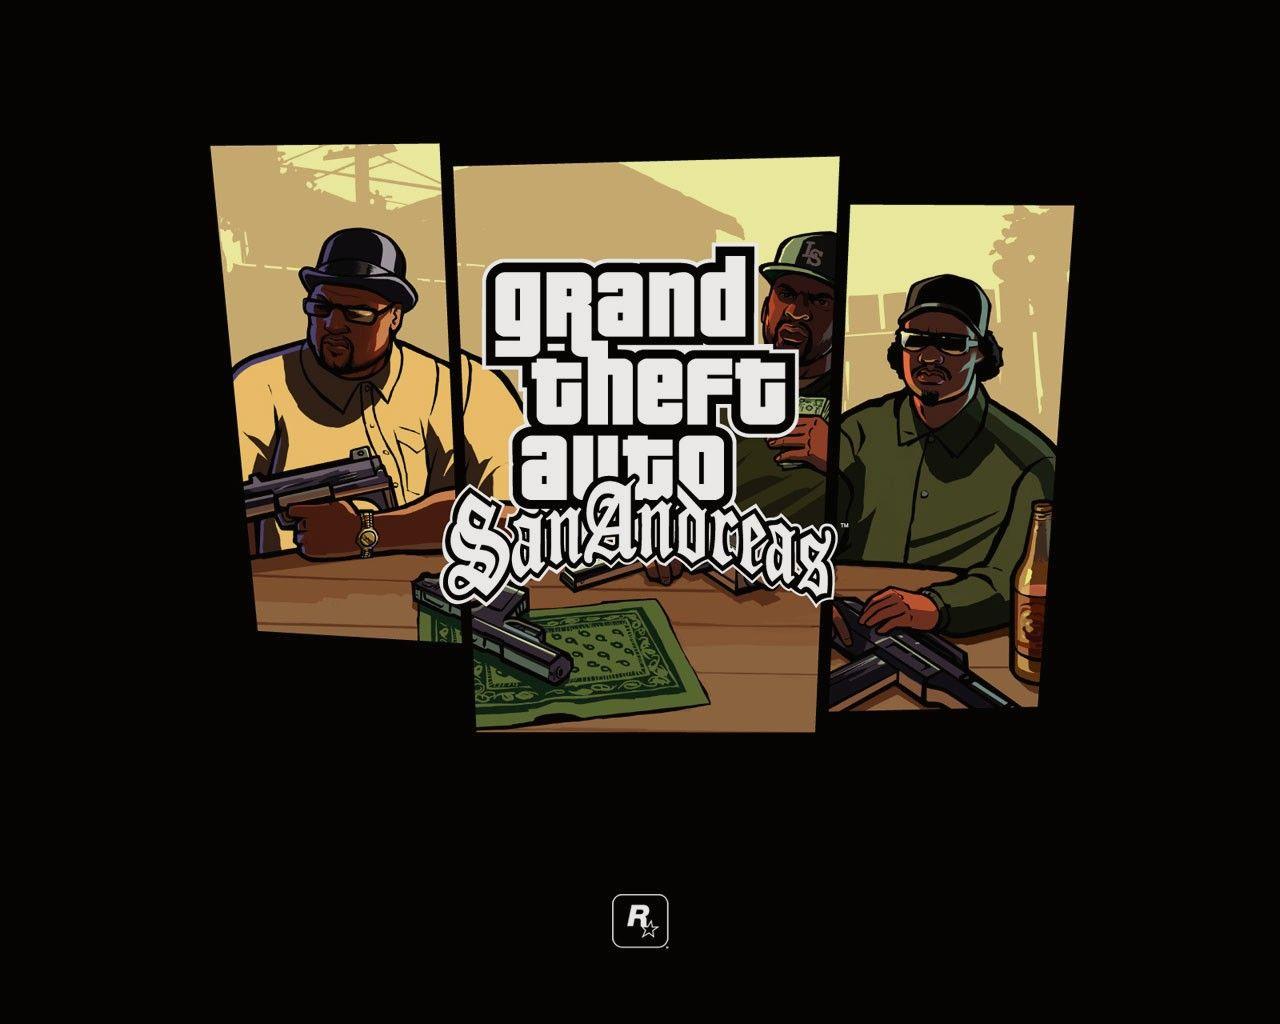 Grand Theft Auto: San Andreas Wallpapers - Wallpaper Cave